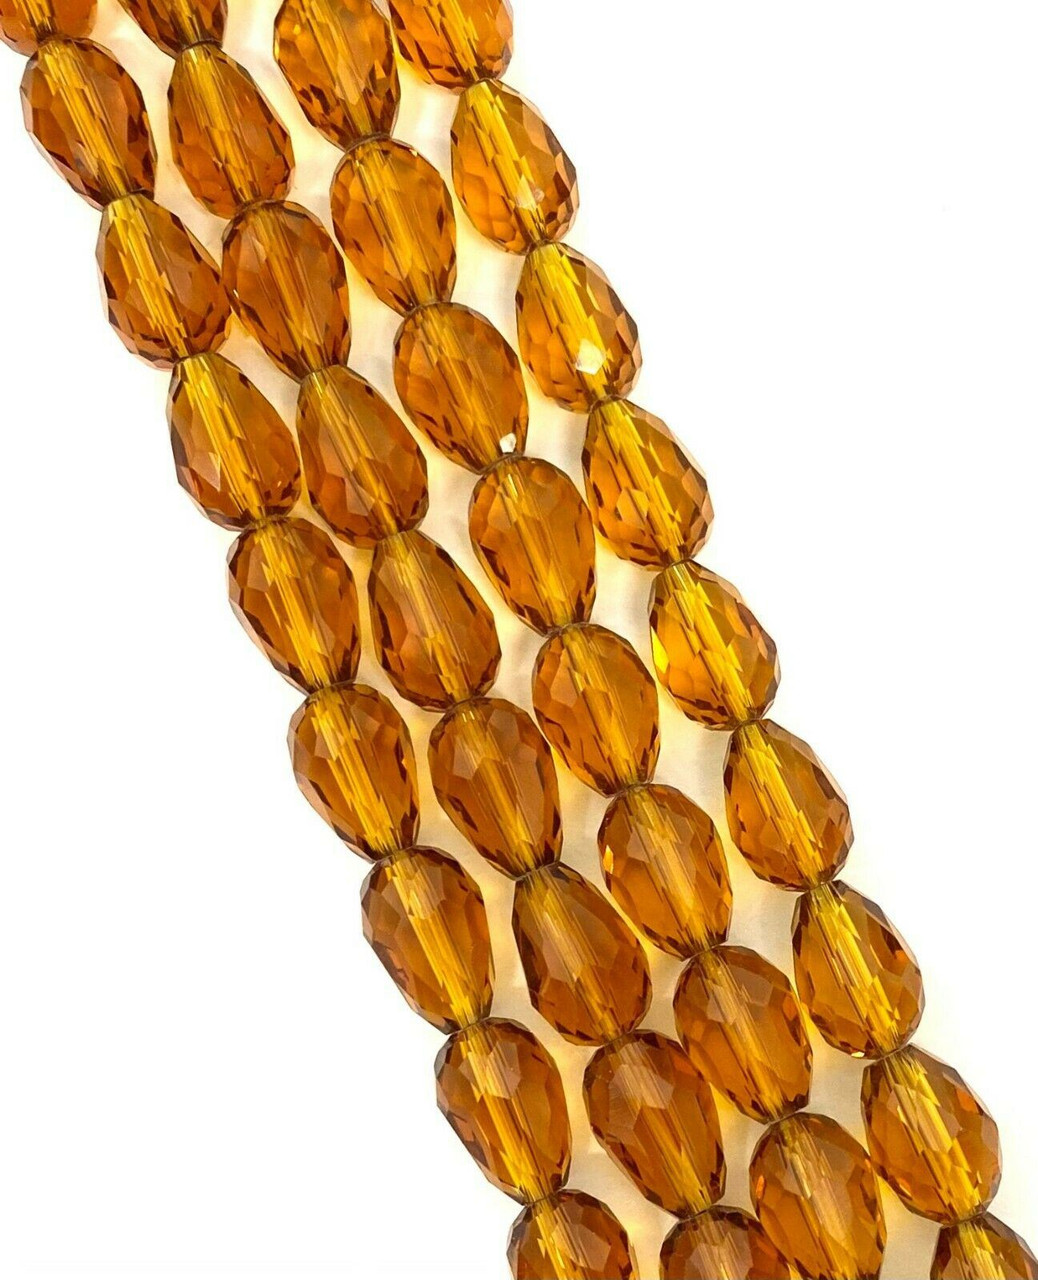 15mm x 10mm glass faceted tear drop beads (briolettes) pack of 24 beads - AMBER